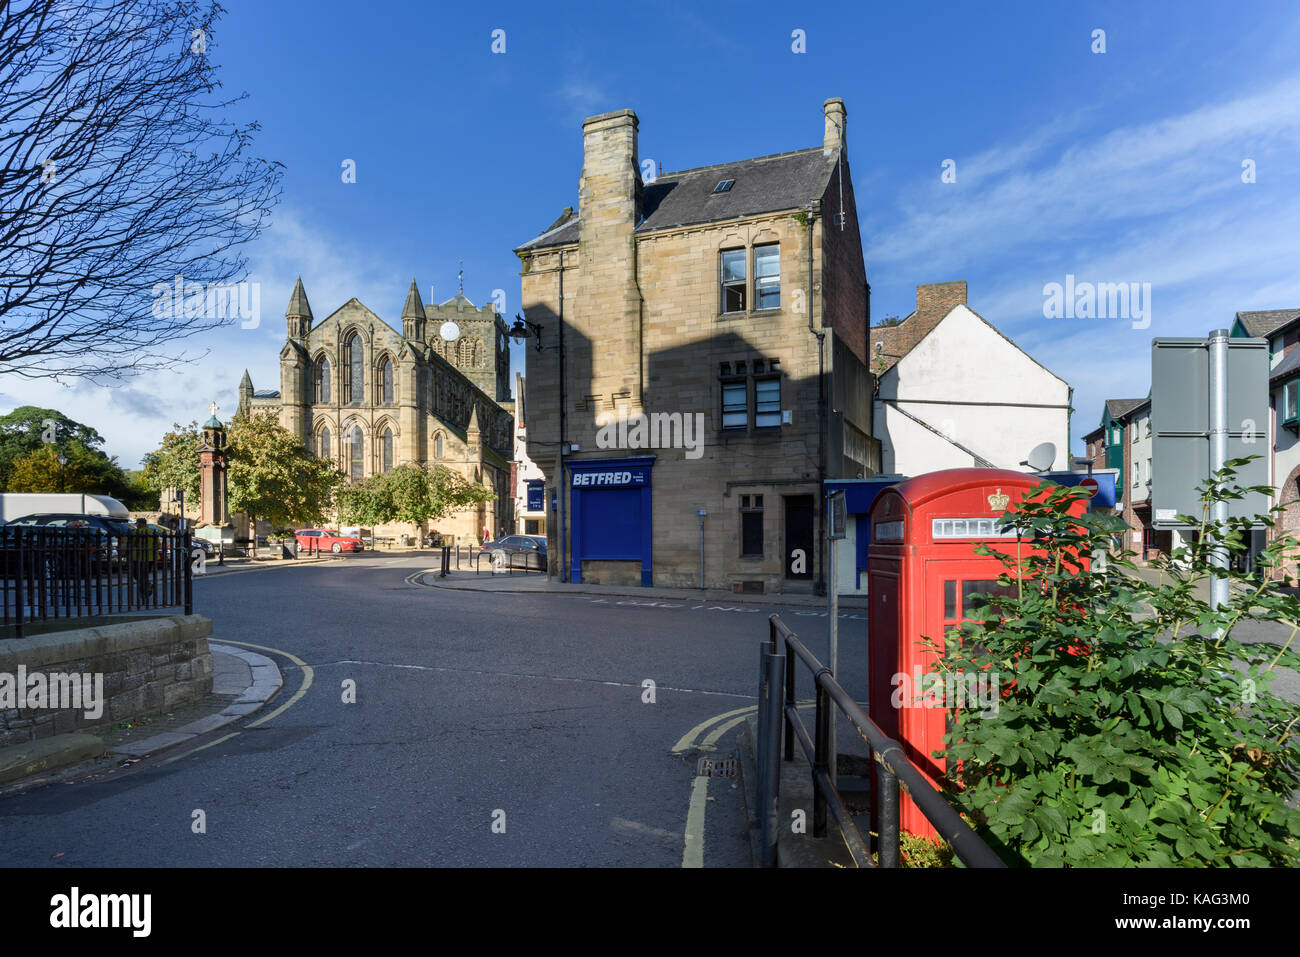 Hexham a Market town in Northumberland Stock Photo